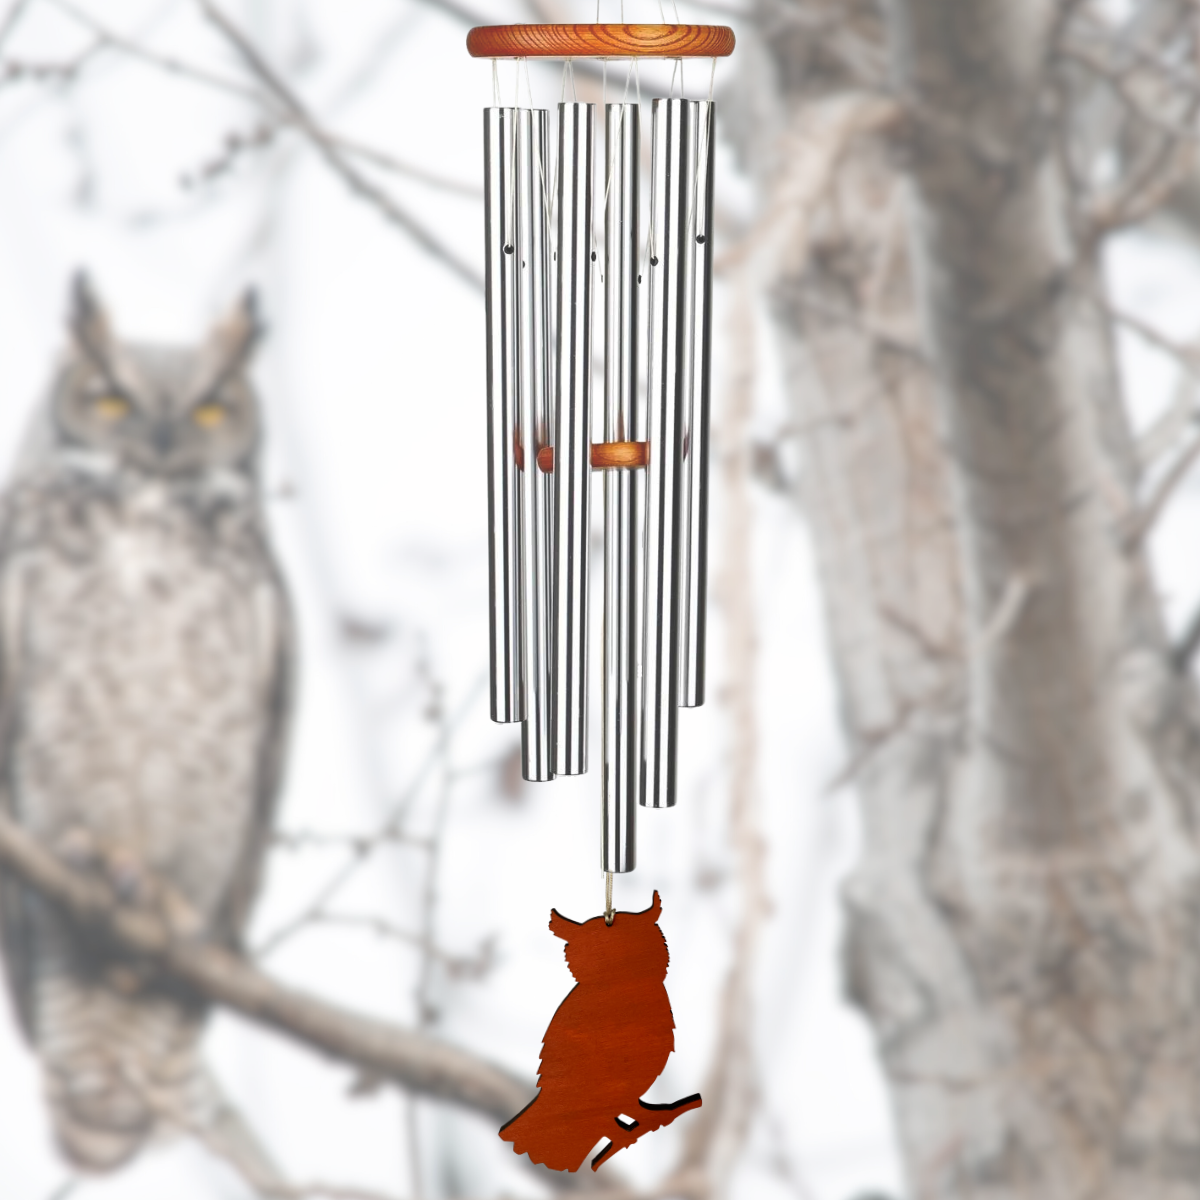 Amazing Grace 40 Inch Wind Chime - Engravable Owl Sail - Silver